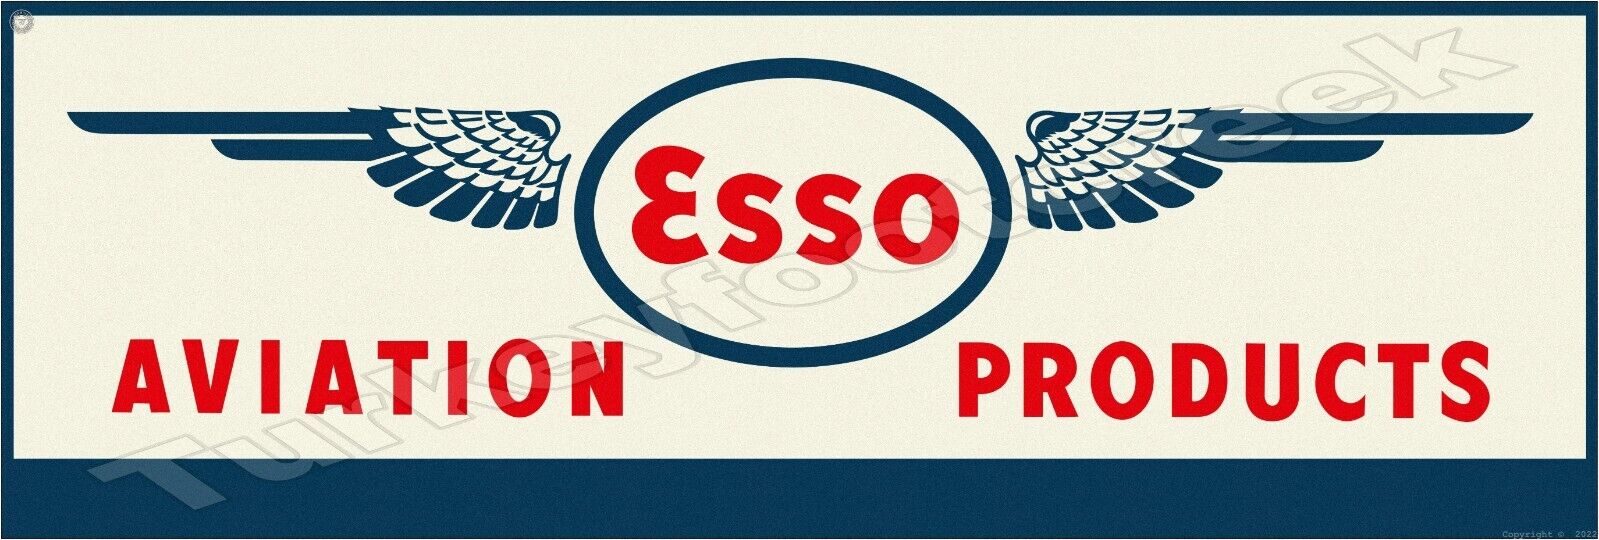 Esso Aviation Products 6\